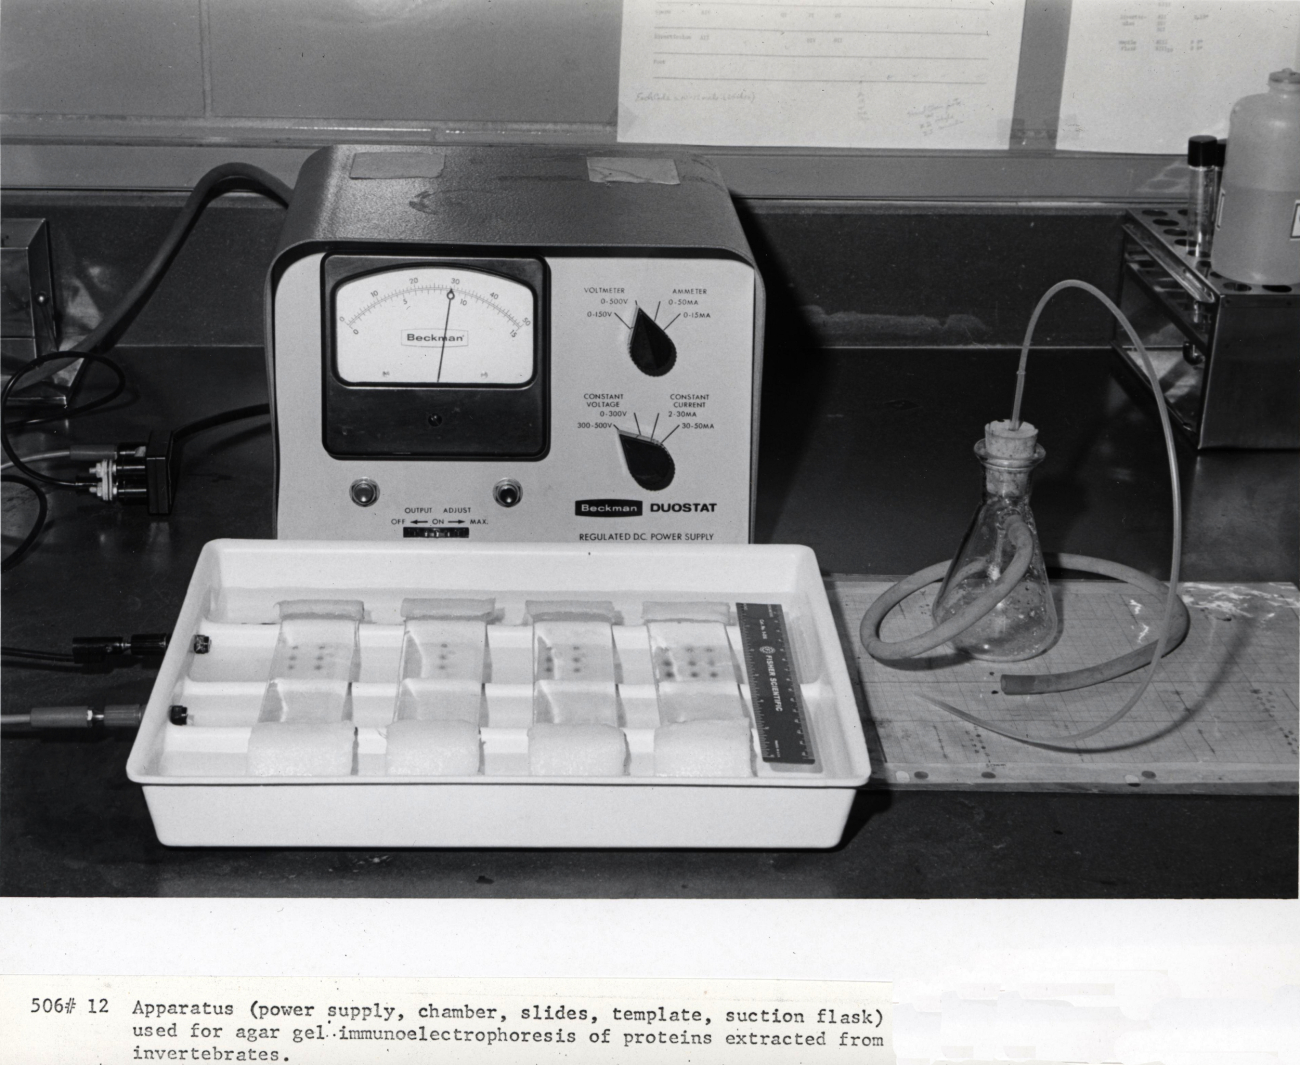 Apparatus (power supply, chamber, slides, template, suction flask) used for agar gel immunoelectrophoresis of proteins extracted from invertebrates